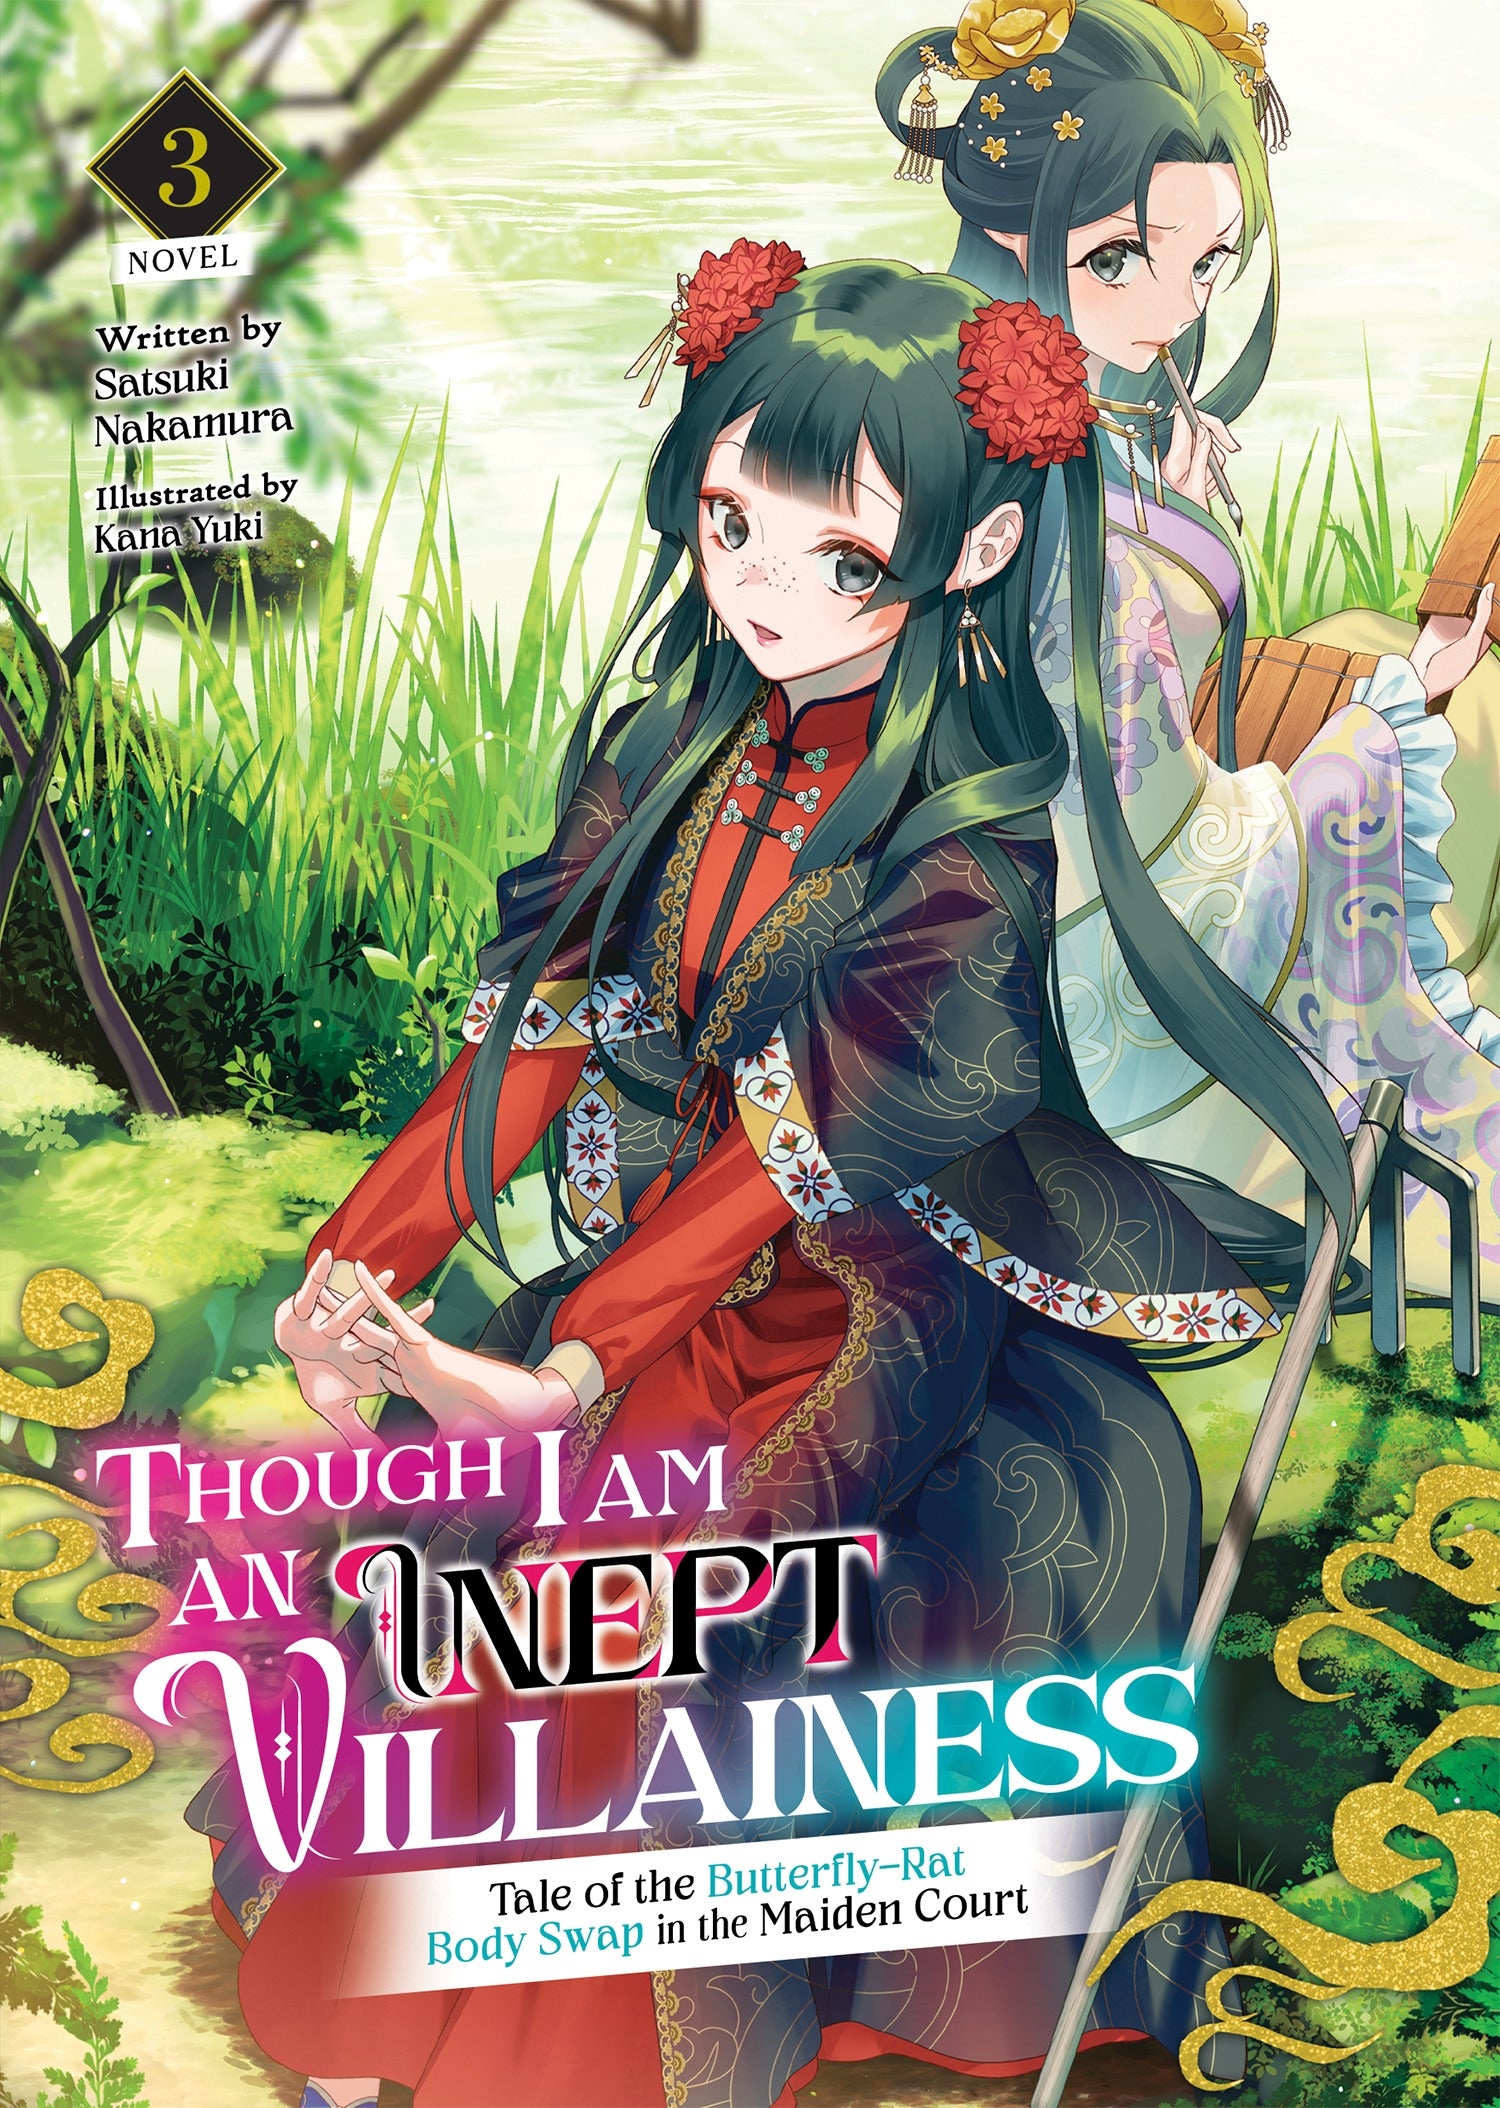 Though I Am an Inept Villainess Tale of the Butterfly-Rat Body Swap in the Maiden Court (Manga) - Vol. 3